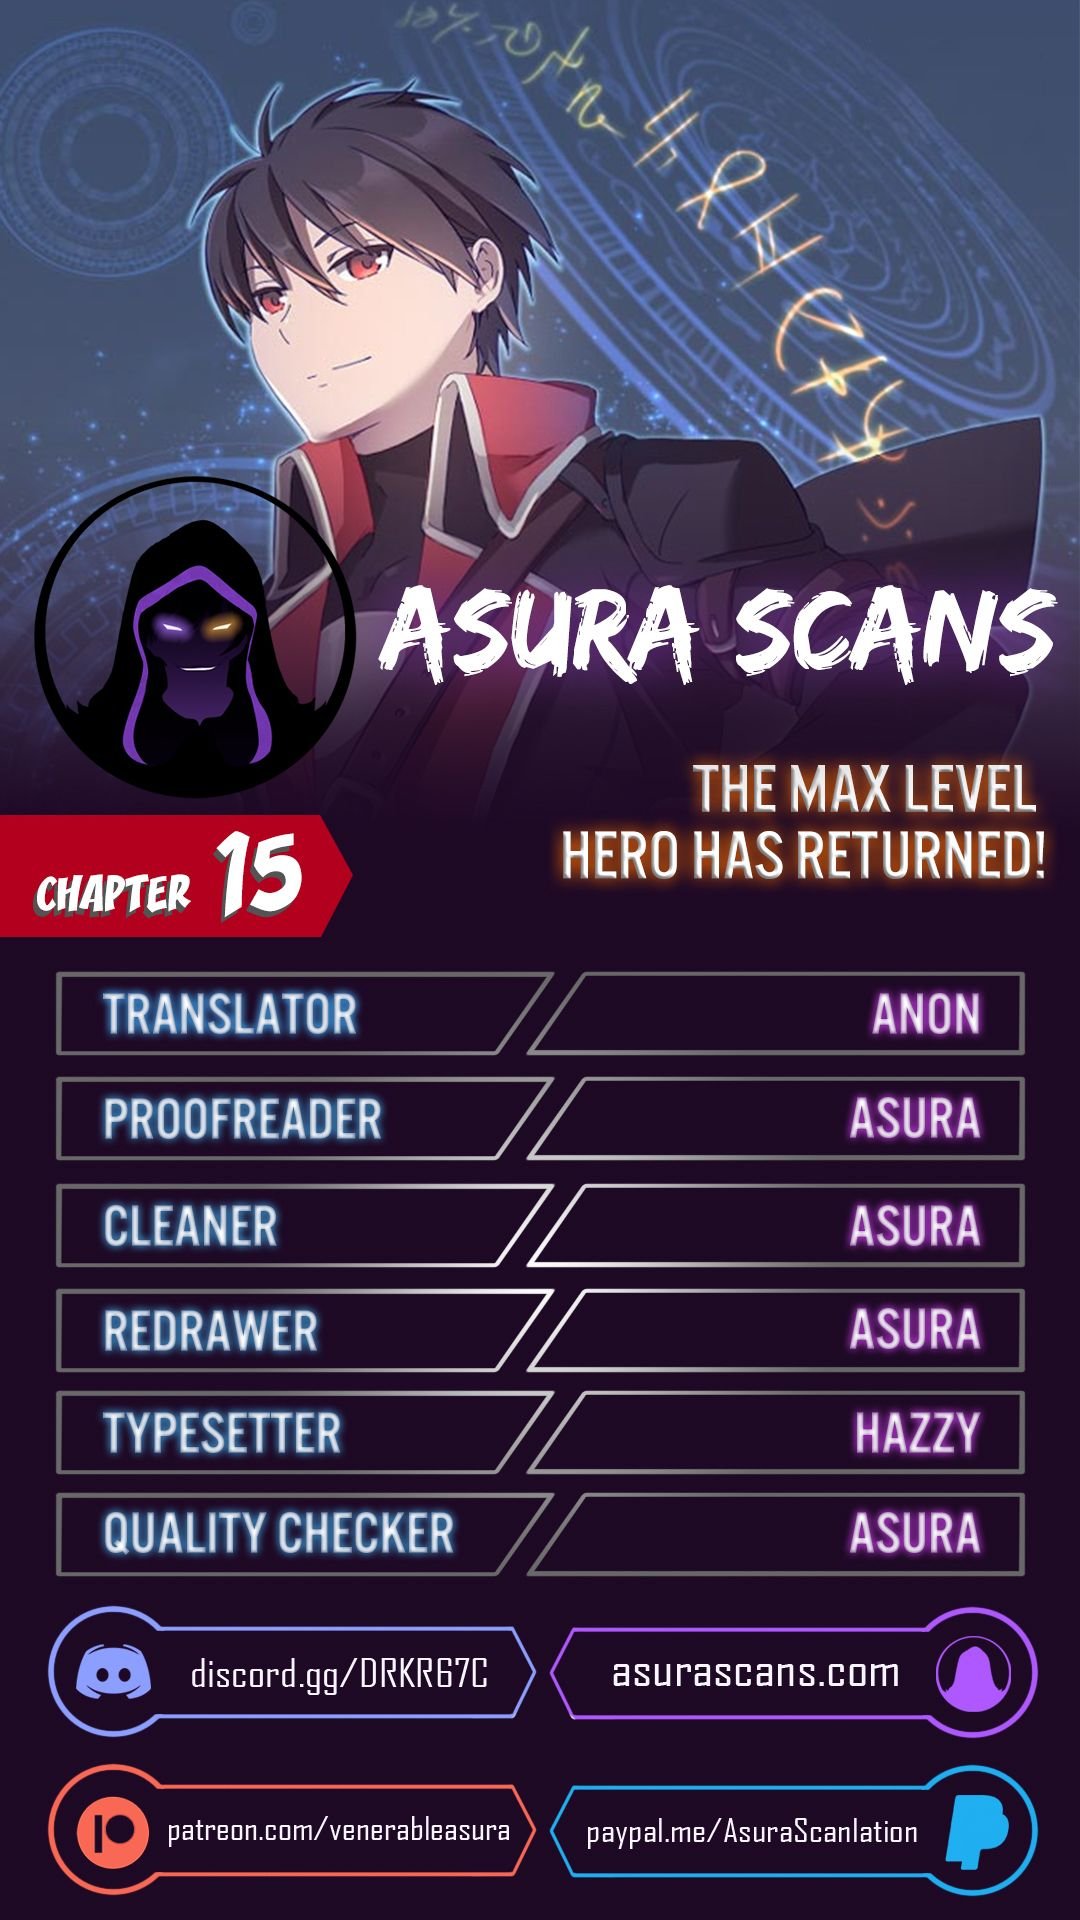 The MAX leveled hero will return! Chapter 15